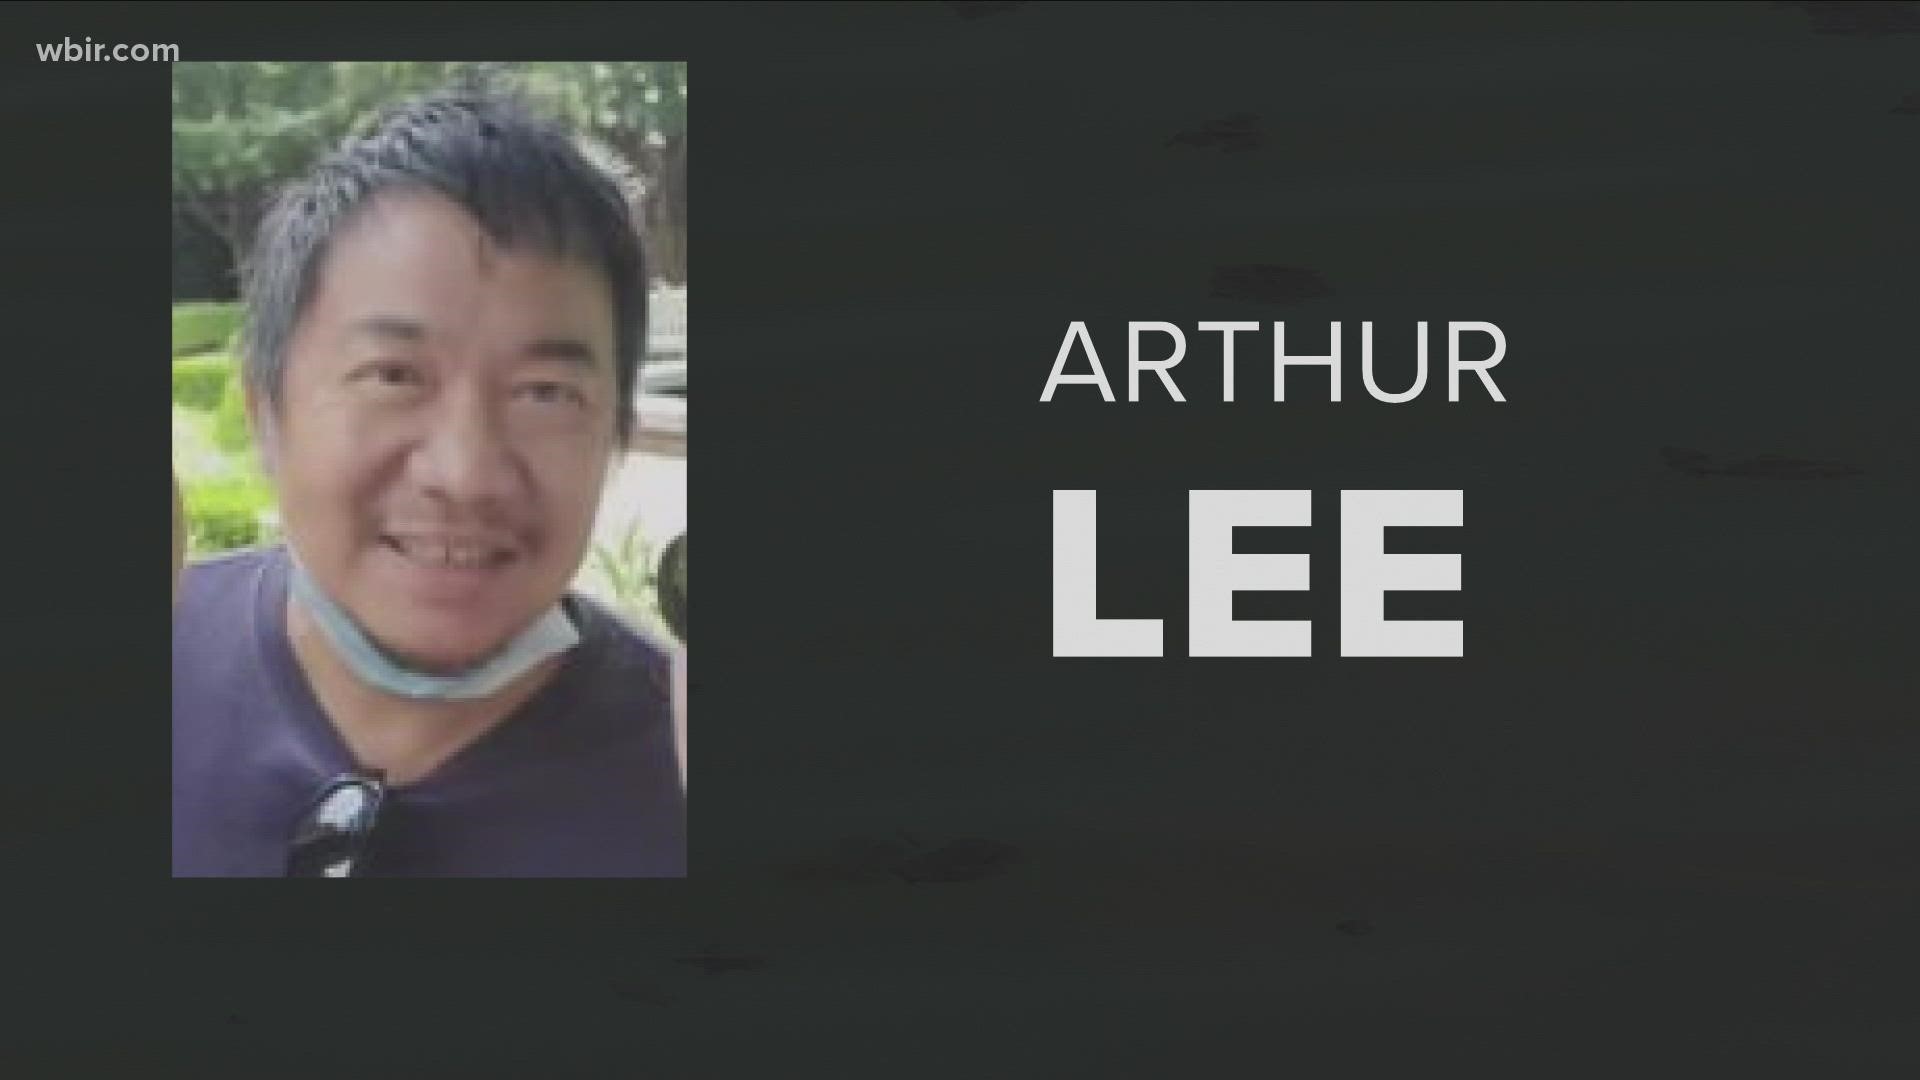 Officials said the body was identified as Arthur Lee, a Roane State Community College geology professor who was reported missing in February.